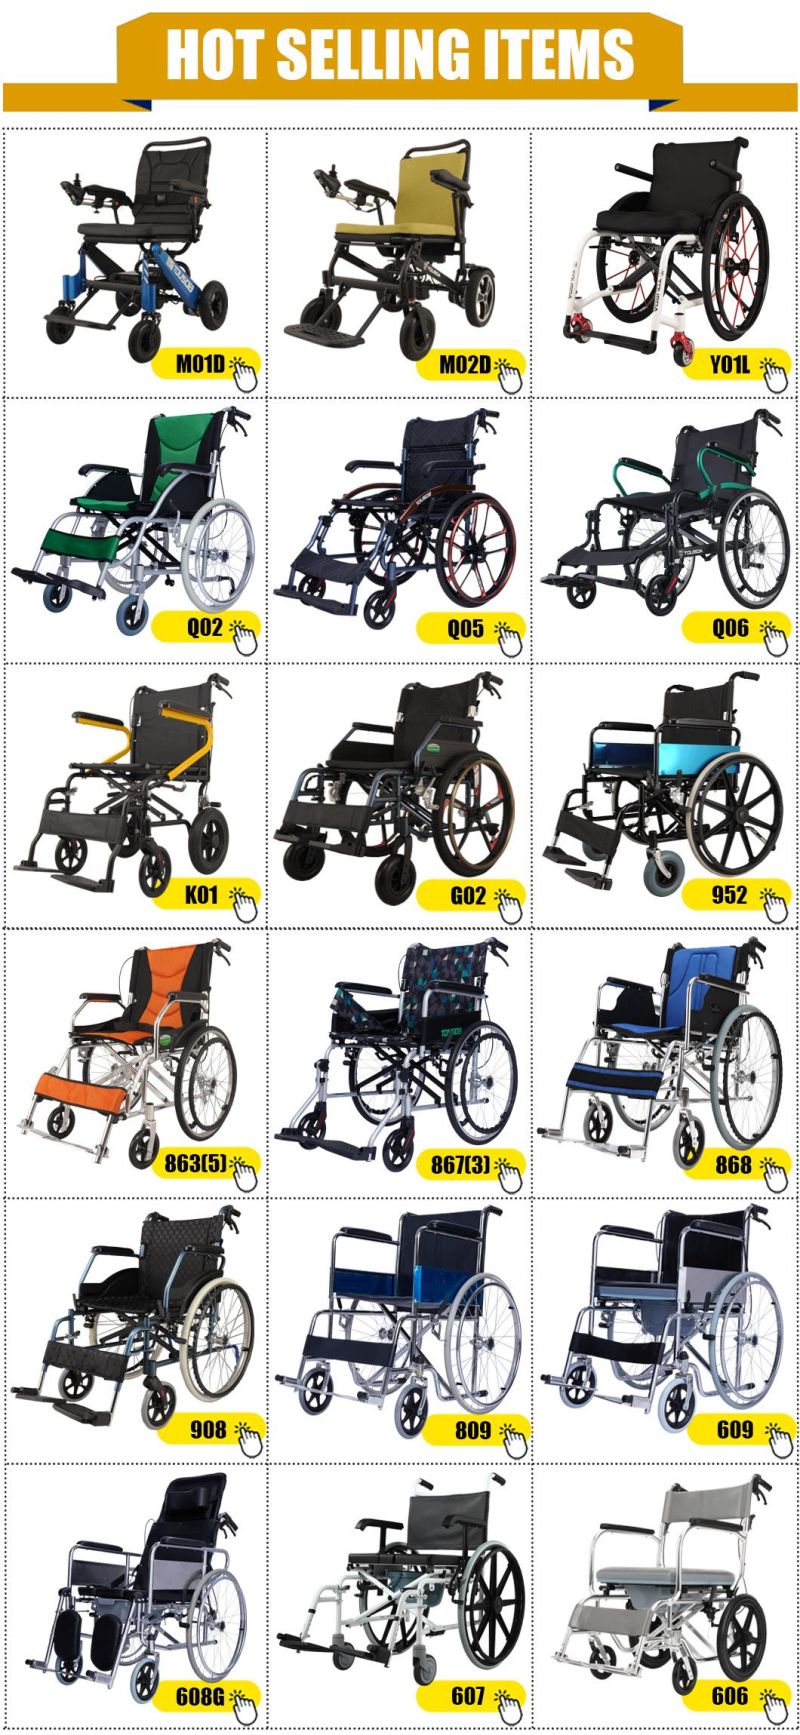 Silla De Ruedas Scooter Price Medical Aluminum Toilet Shower Commode Sport Folding Manual Hot Sale Best Price Foldable Motorized Wheelchair for Lightweight